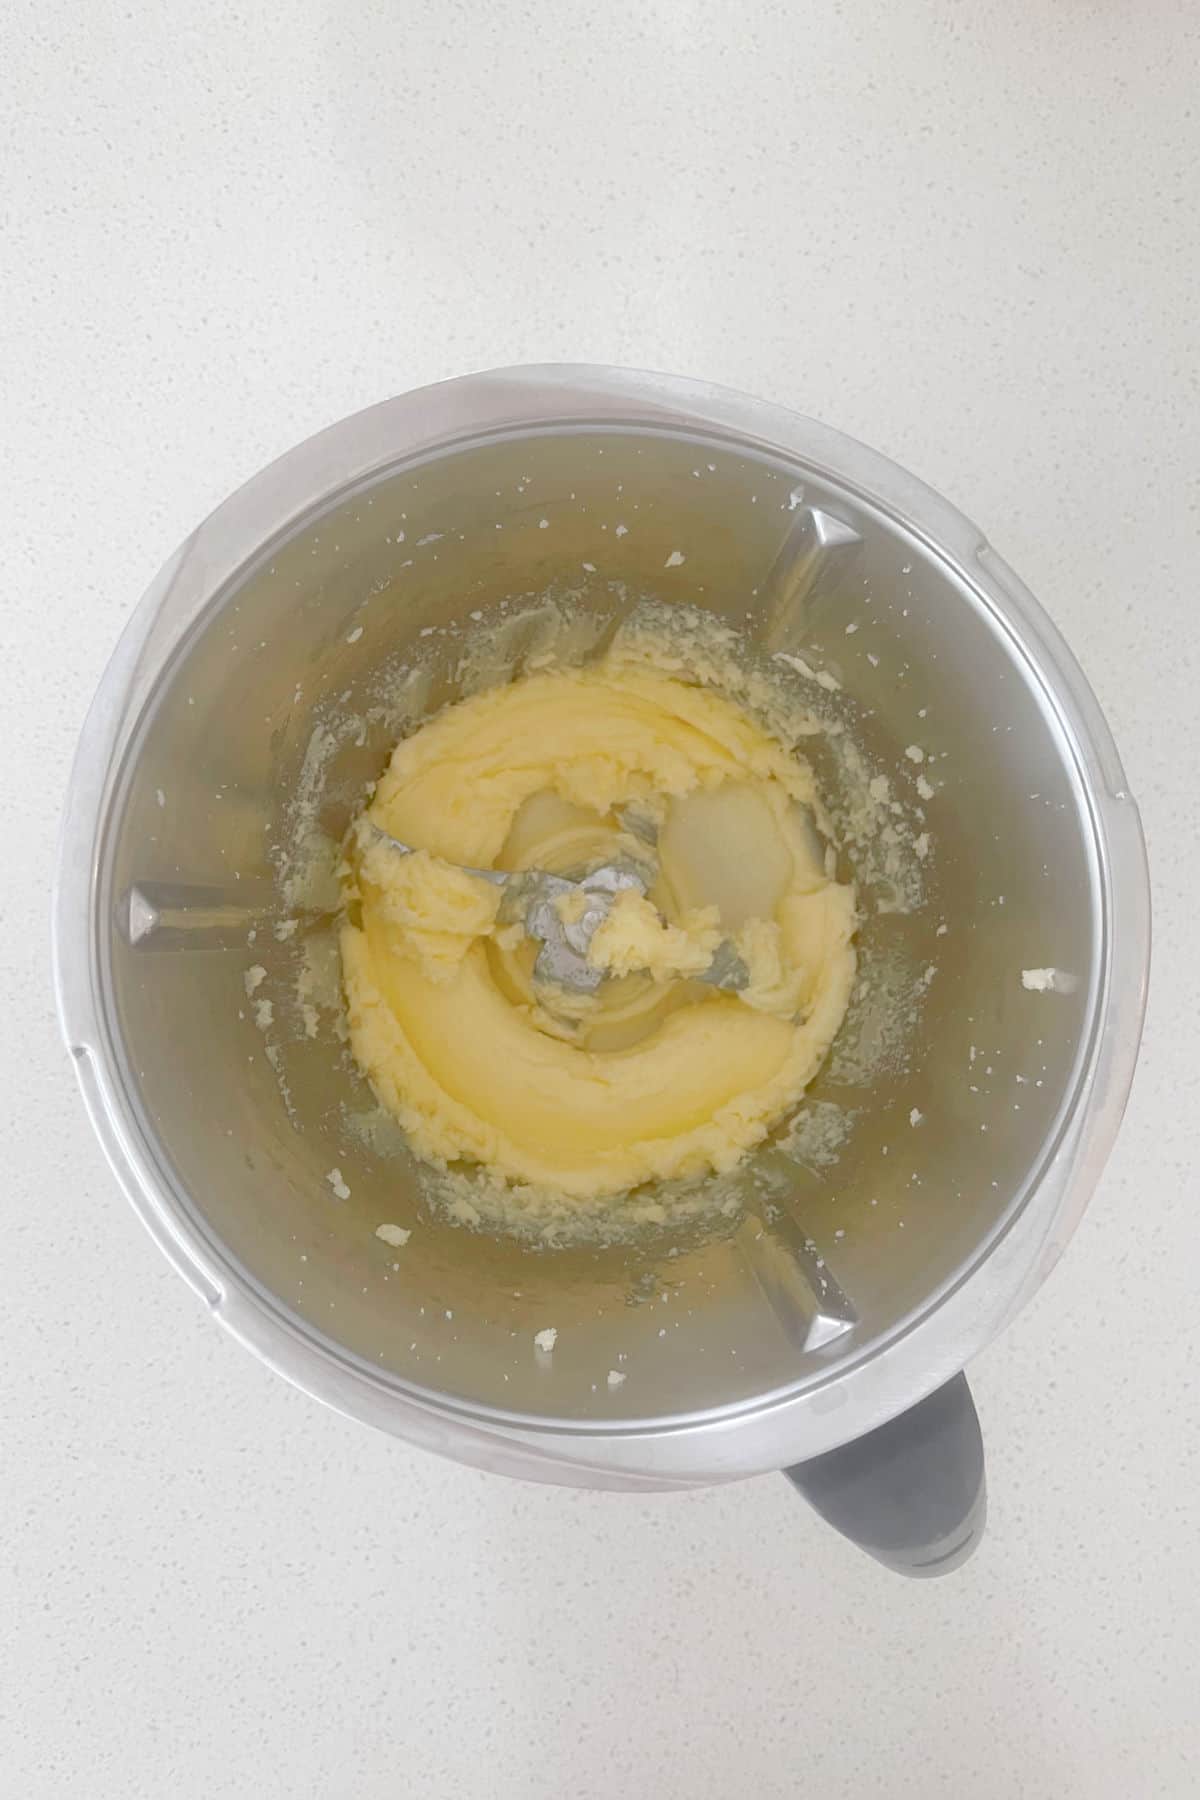 creamed butter and sugar in a thermomix bowl.